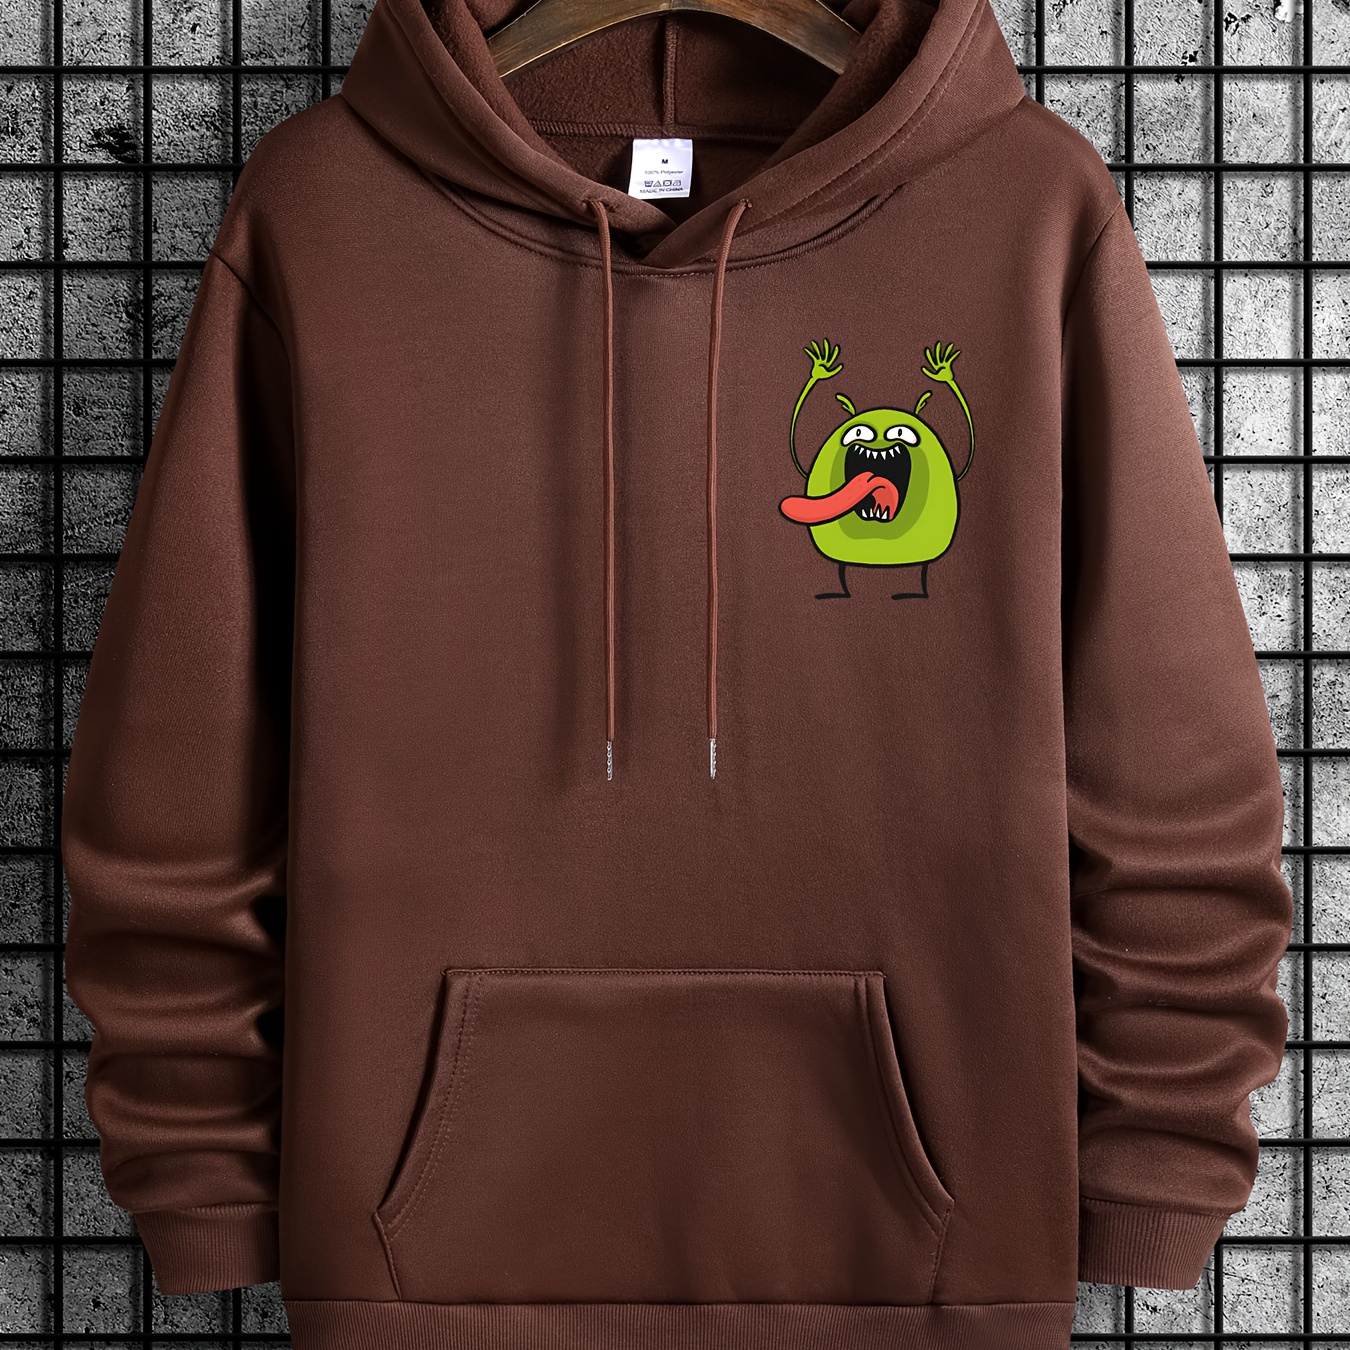 

Green Monster With Tongue Out Print Sweatshirt, Creative Graphic Design Hoodies For Men, Men's Hooded Streetwear Pullover, For All Seasons, As Gifts